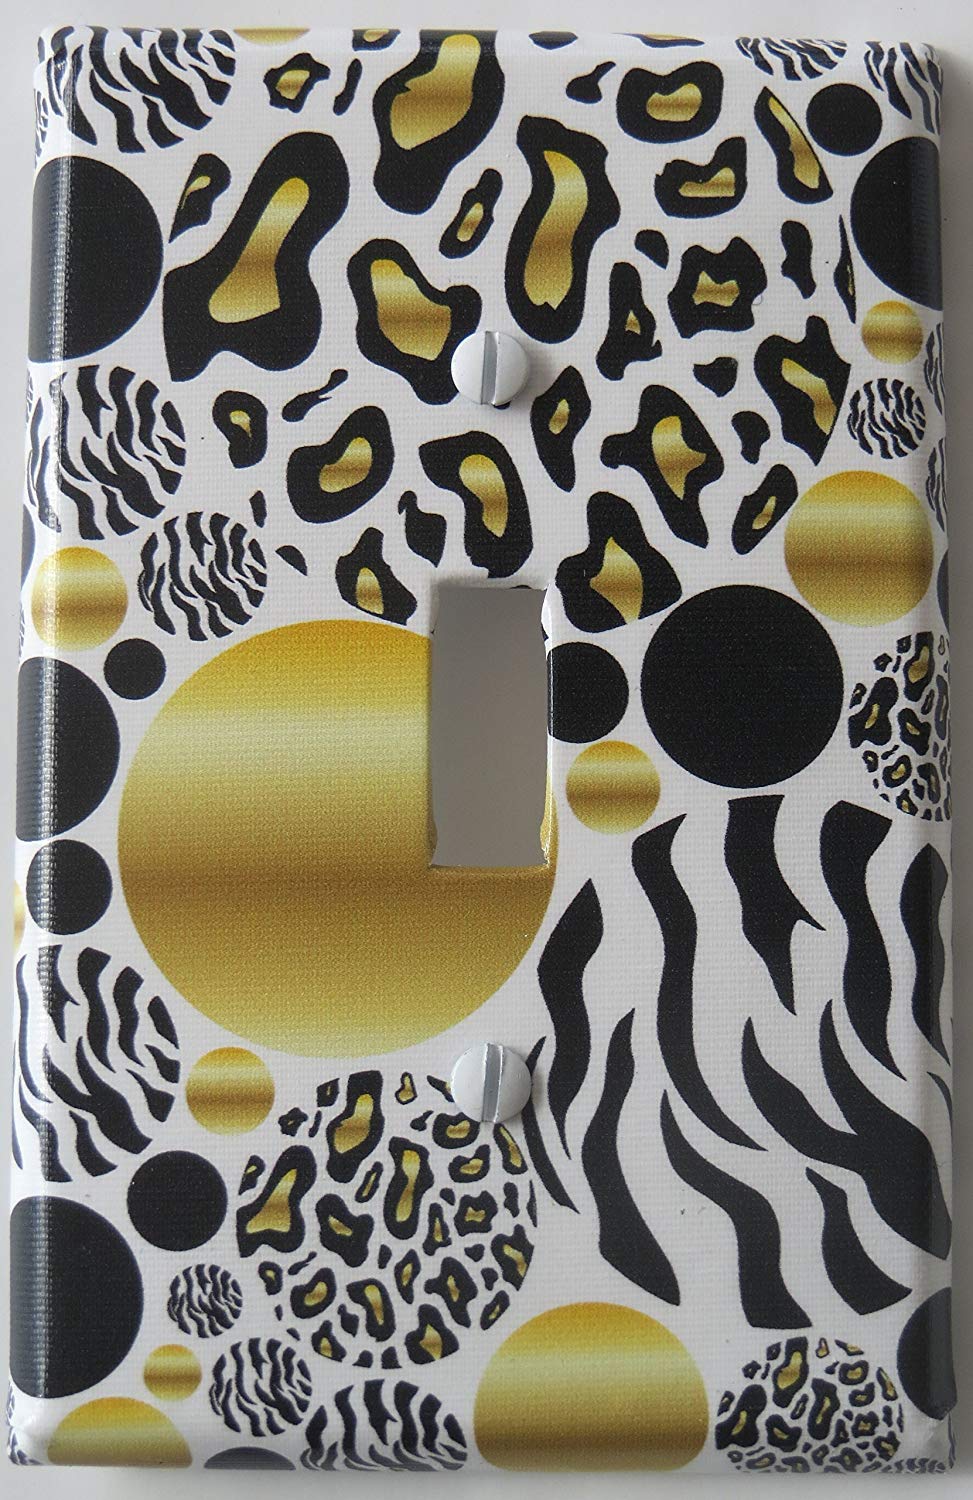 Gold and Black Leopard Print Dots Light Switch Plate Covers with Zebra Print Dots